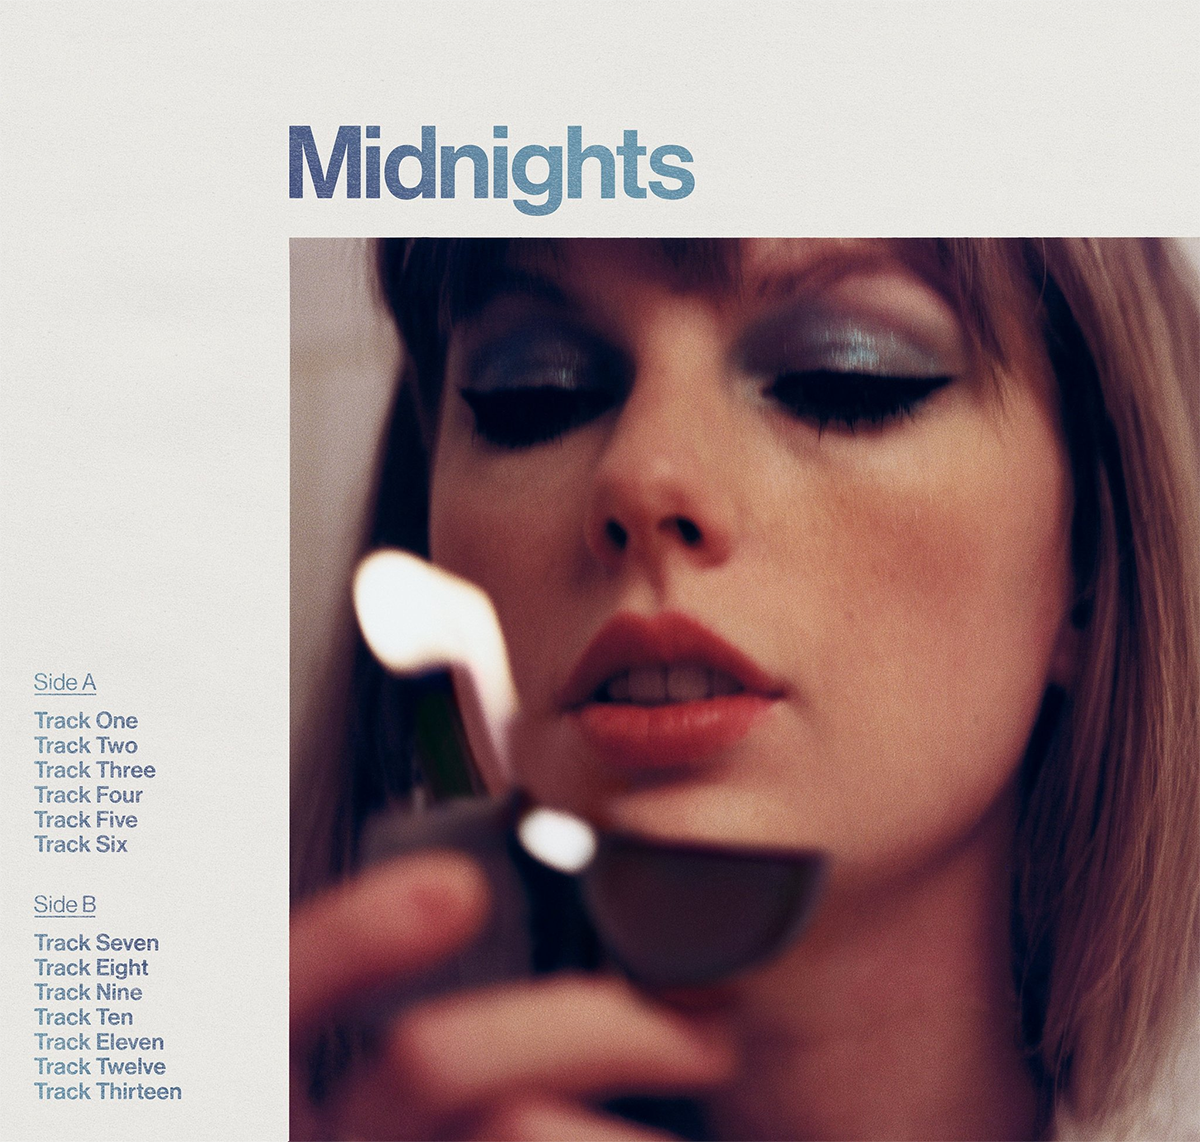 Taylor Swift 'Midnights' album cover